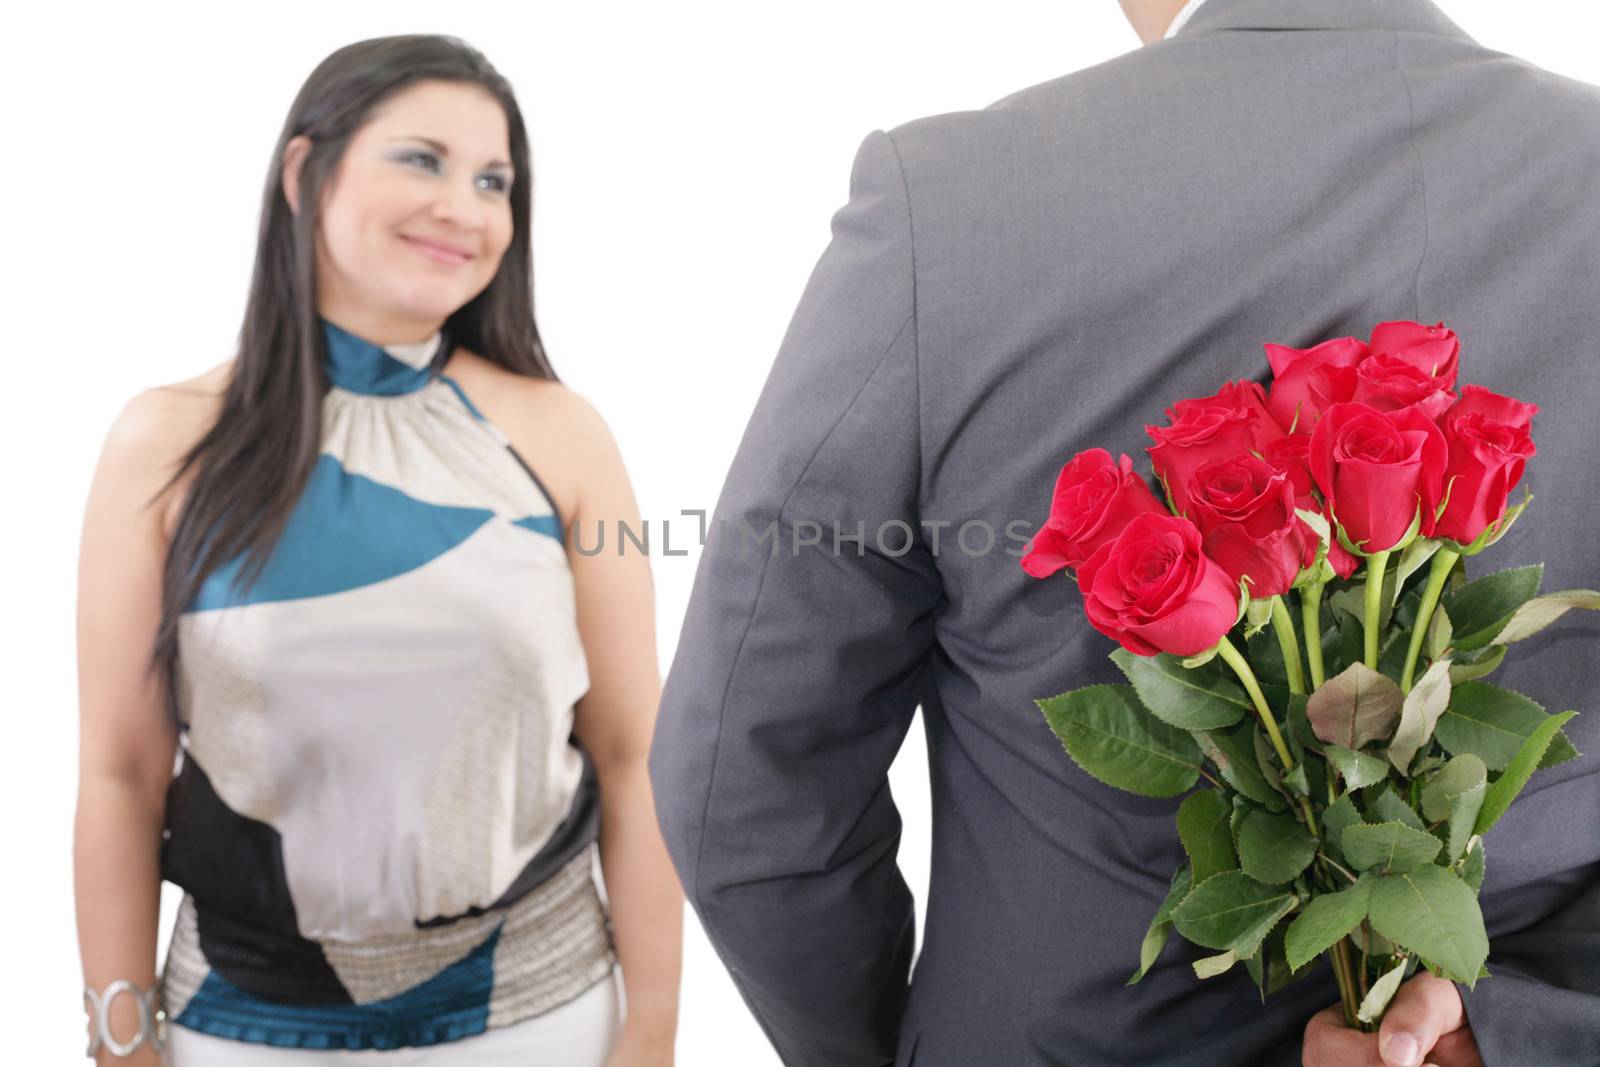 man hiding bunch of red roses behind his back to surprise his girlfriend